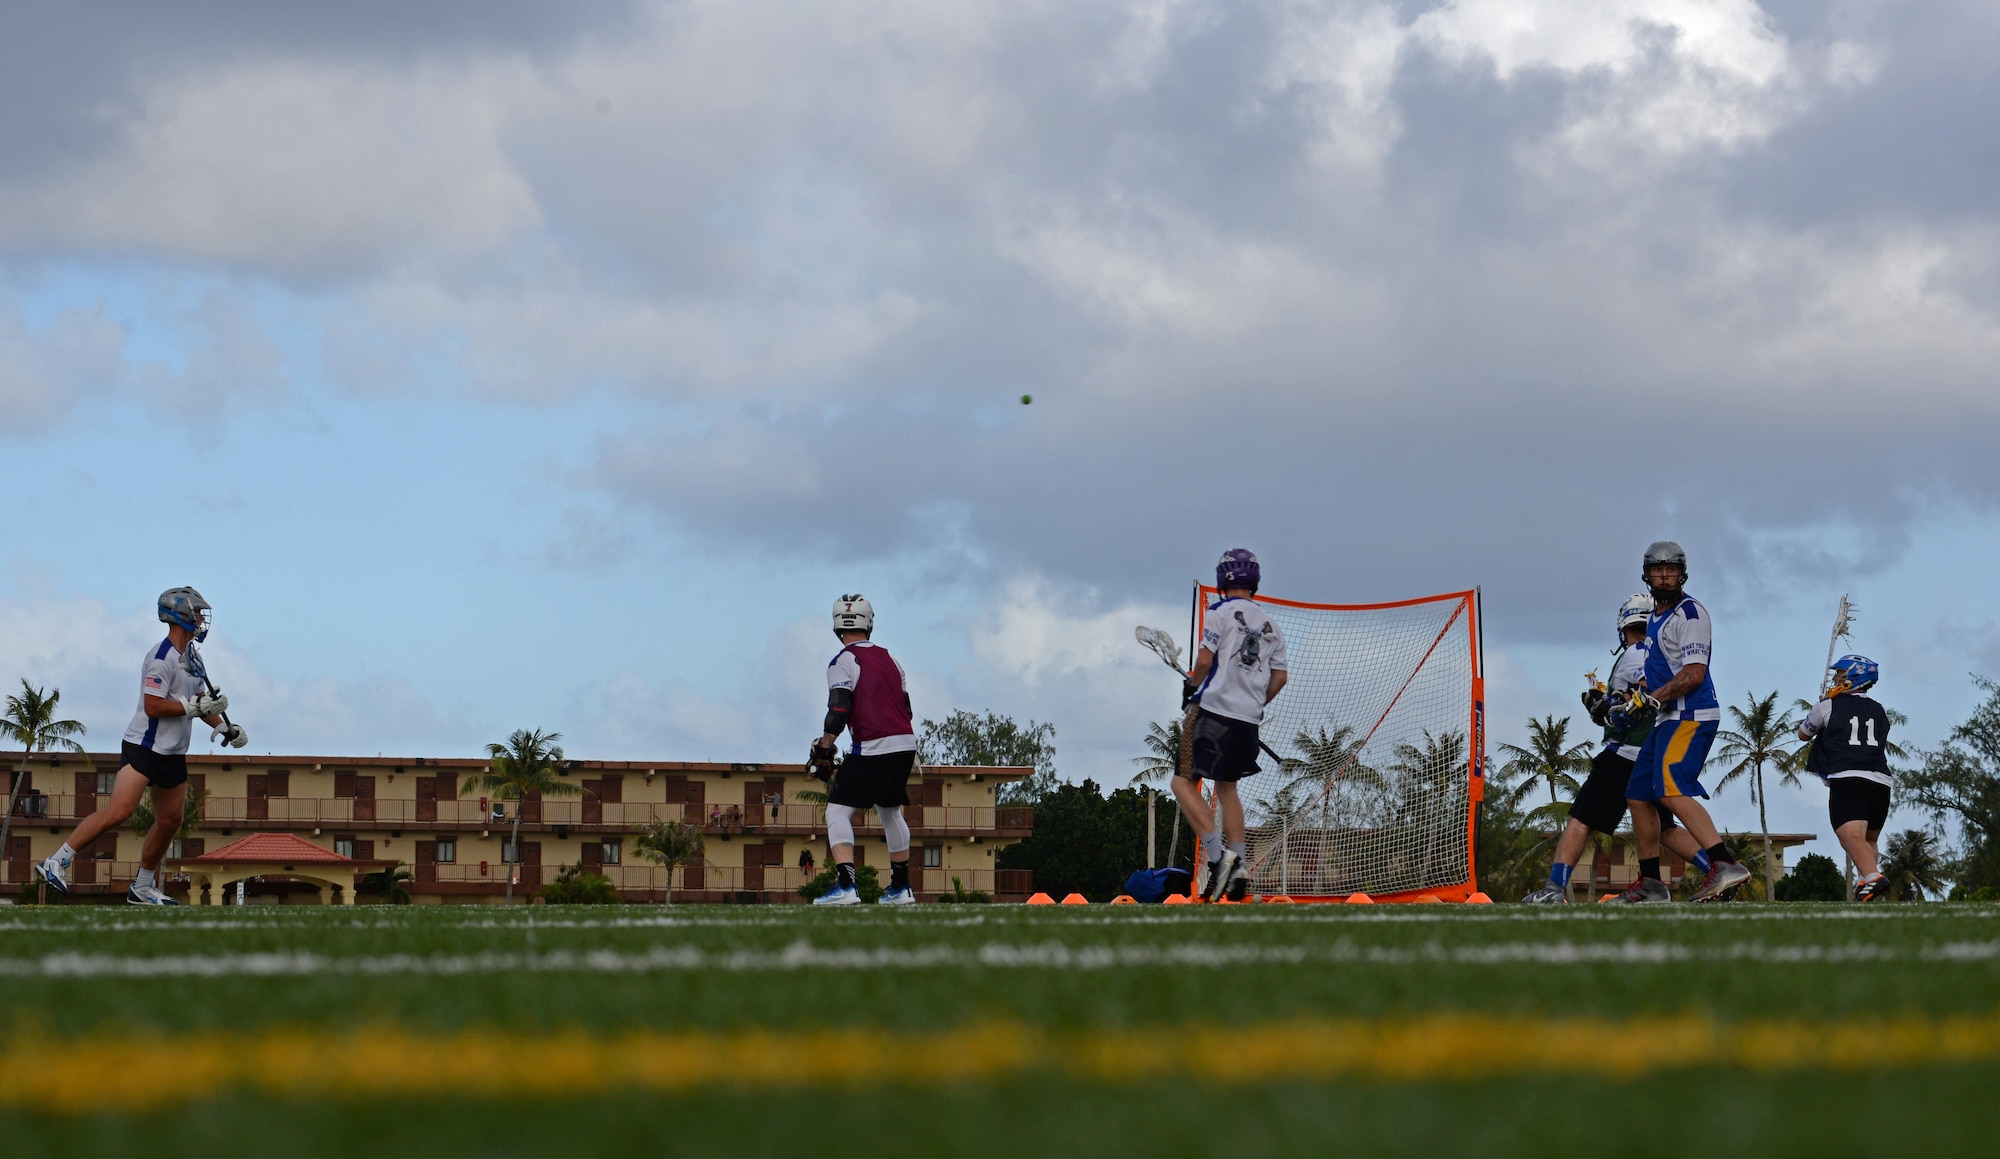 U.S. Air Force and Navy members of the Guam Black Tips lacrosse team scrimmage during practice Jan. 8, 2016, at Andersen Air Force Base, Guam. The Black Tips practice and travel to tournaments in the Indo-Asian-Pacific Region to represent Guam. (U.S. Air Force photo by Airman 1st Class Gerald R. Willis)